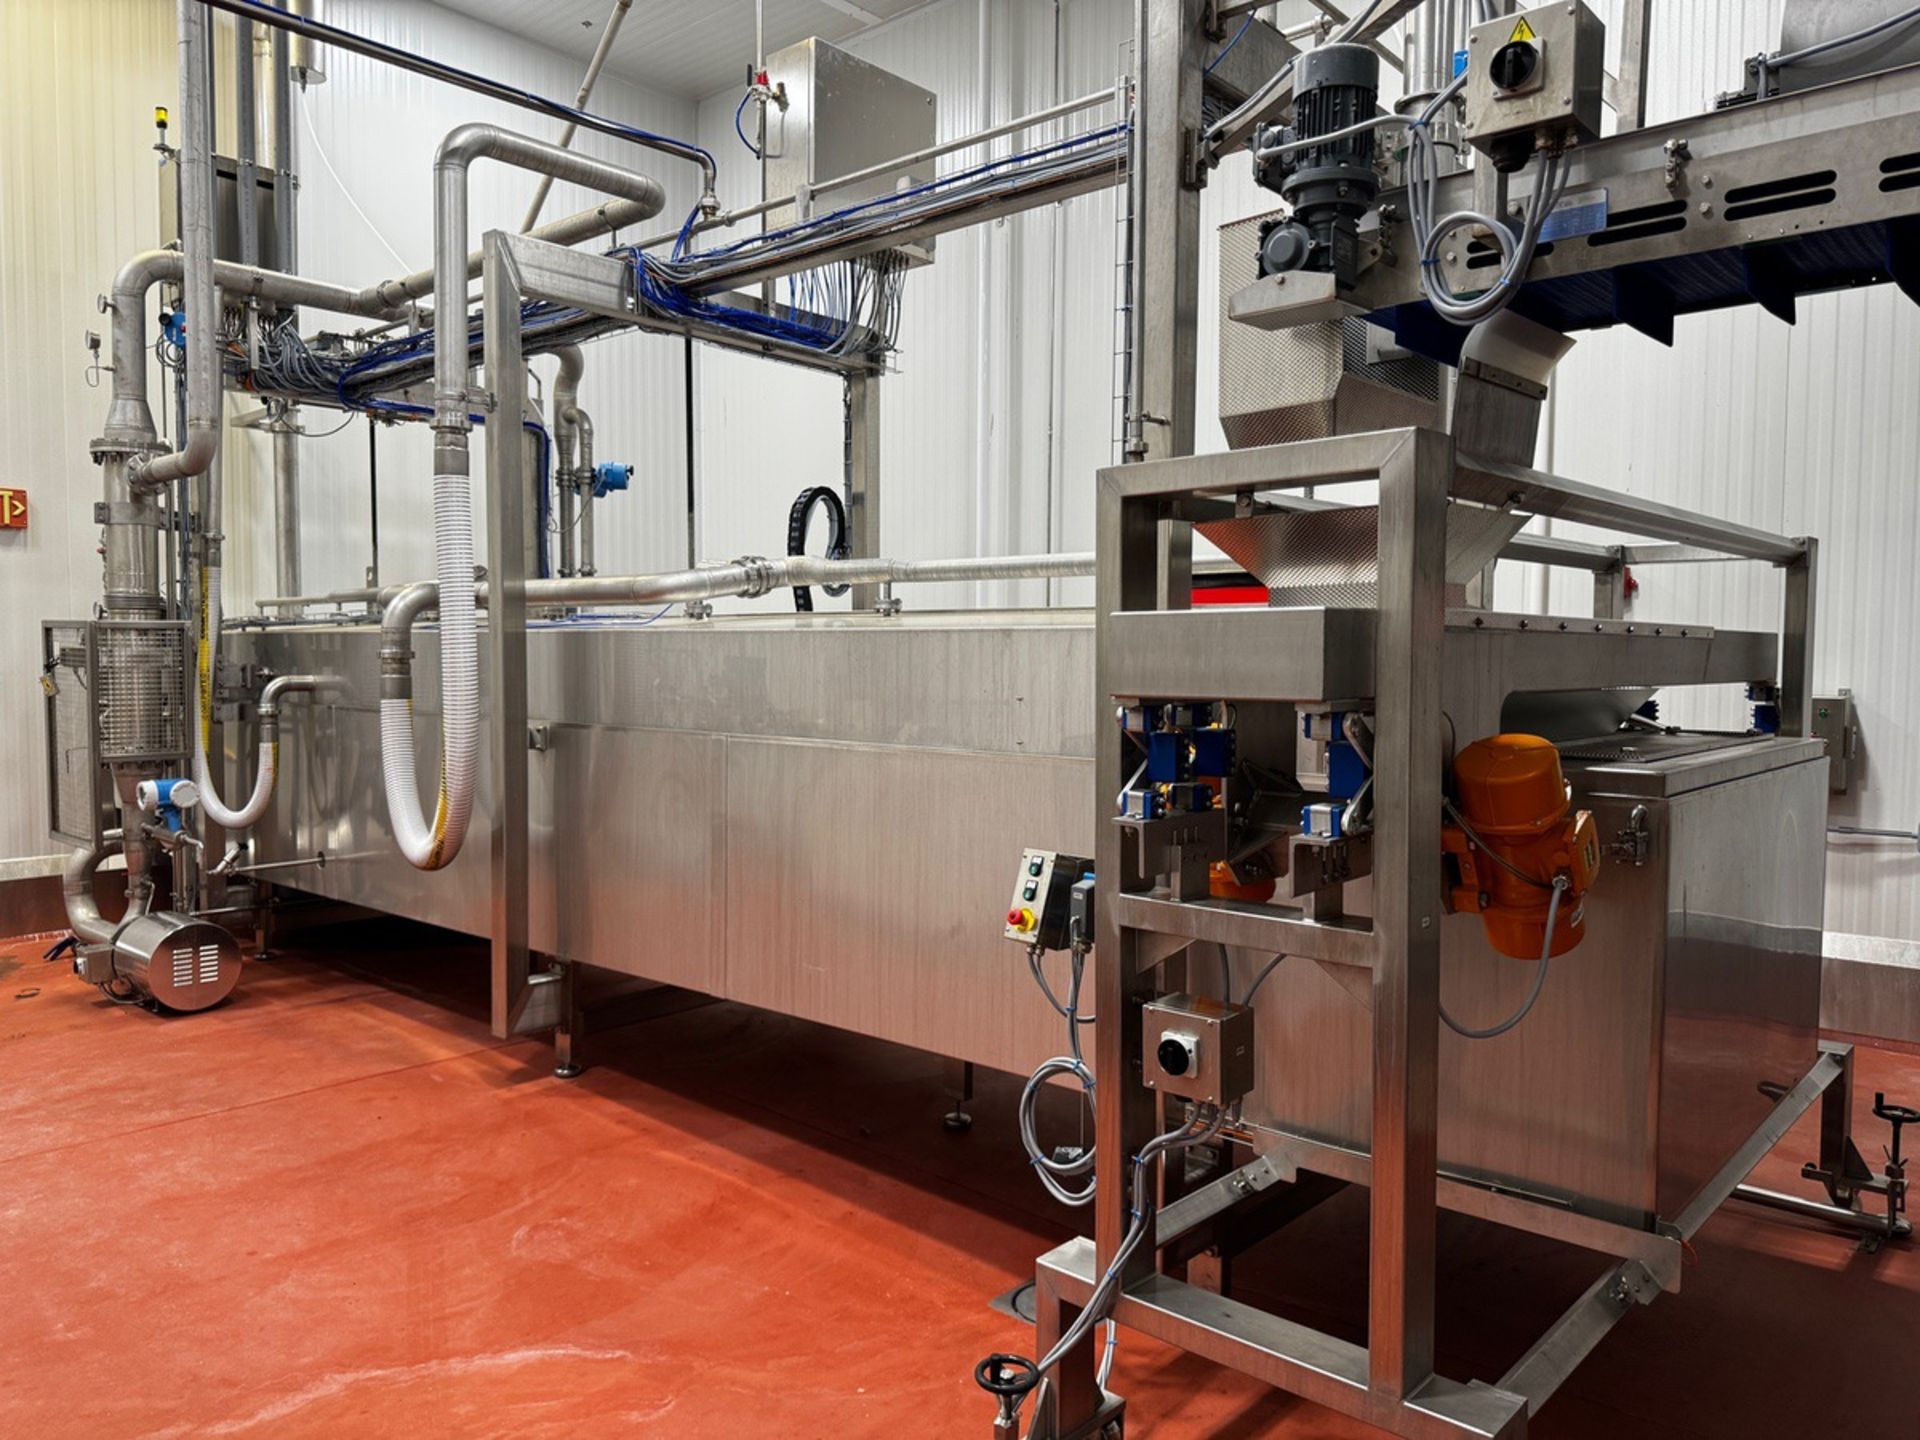 2018 Pavan COTTORE CV.100/3/6 Immersion Cooking Line with Vibratory Infeed Conveyor, Automated Hood - Image 5 of 8